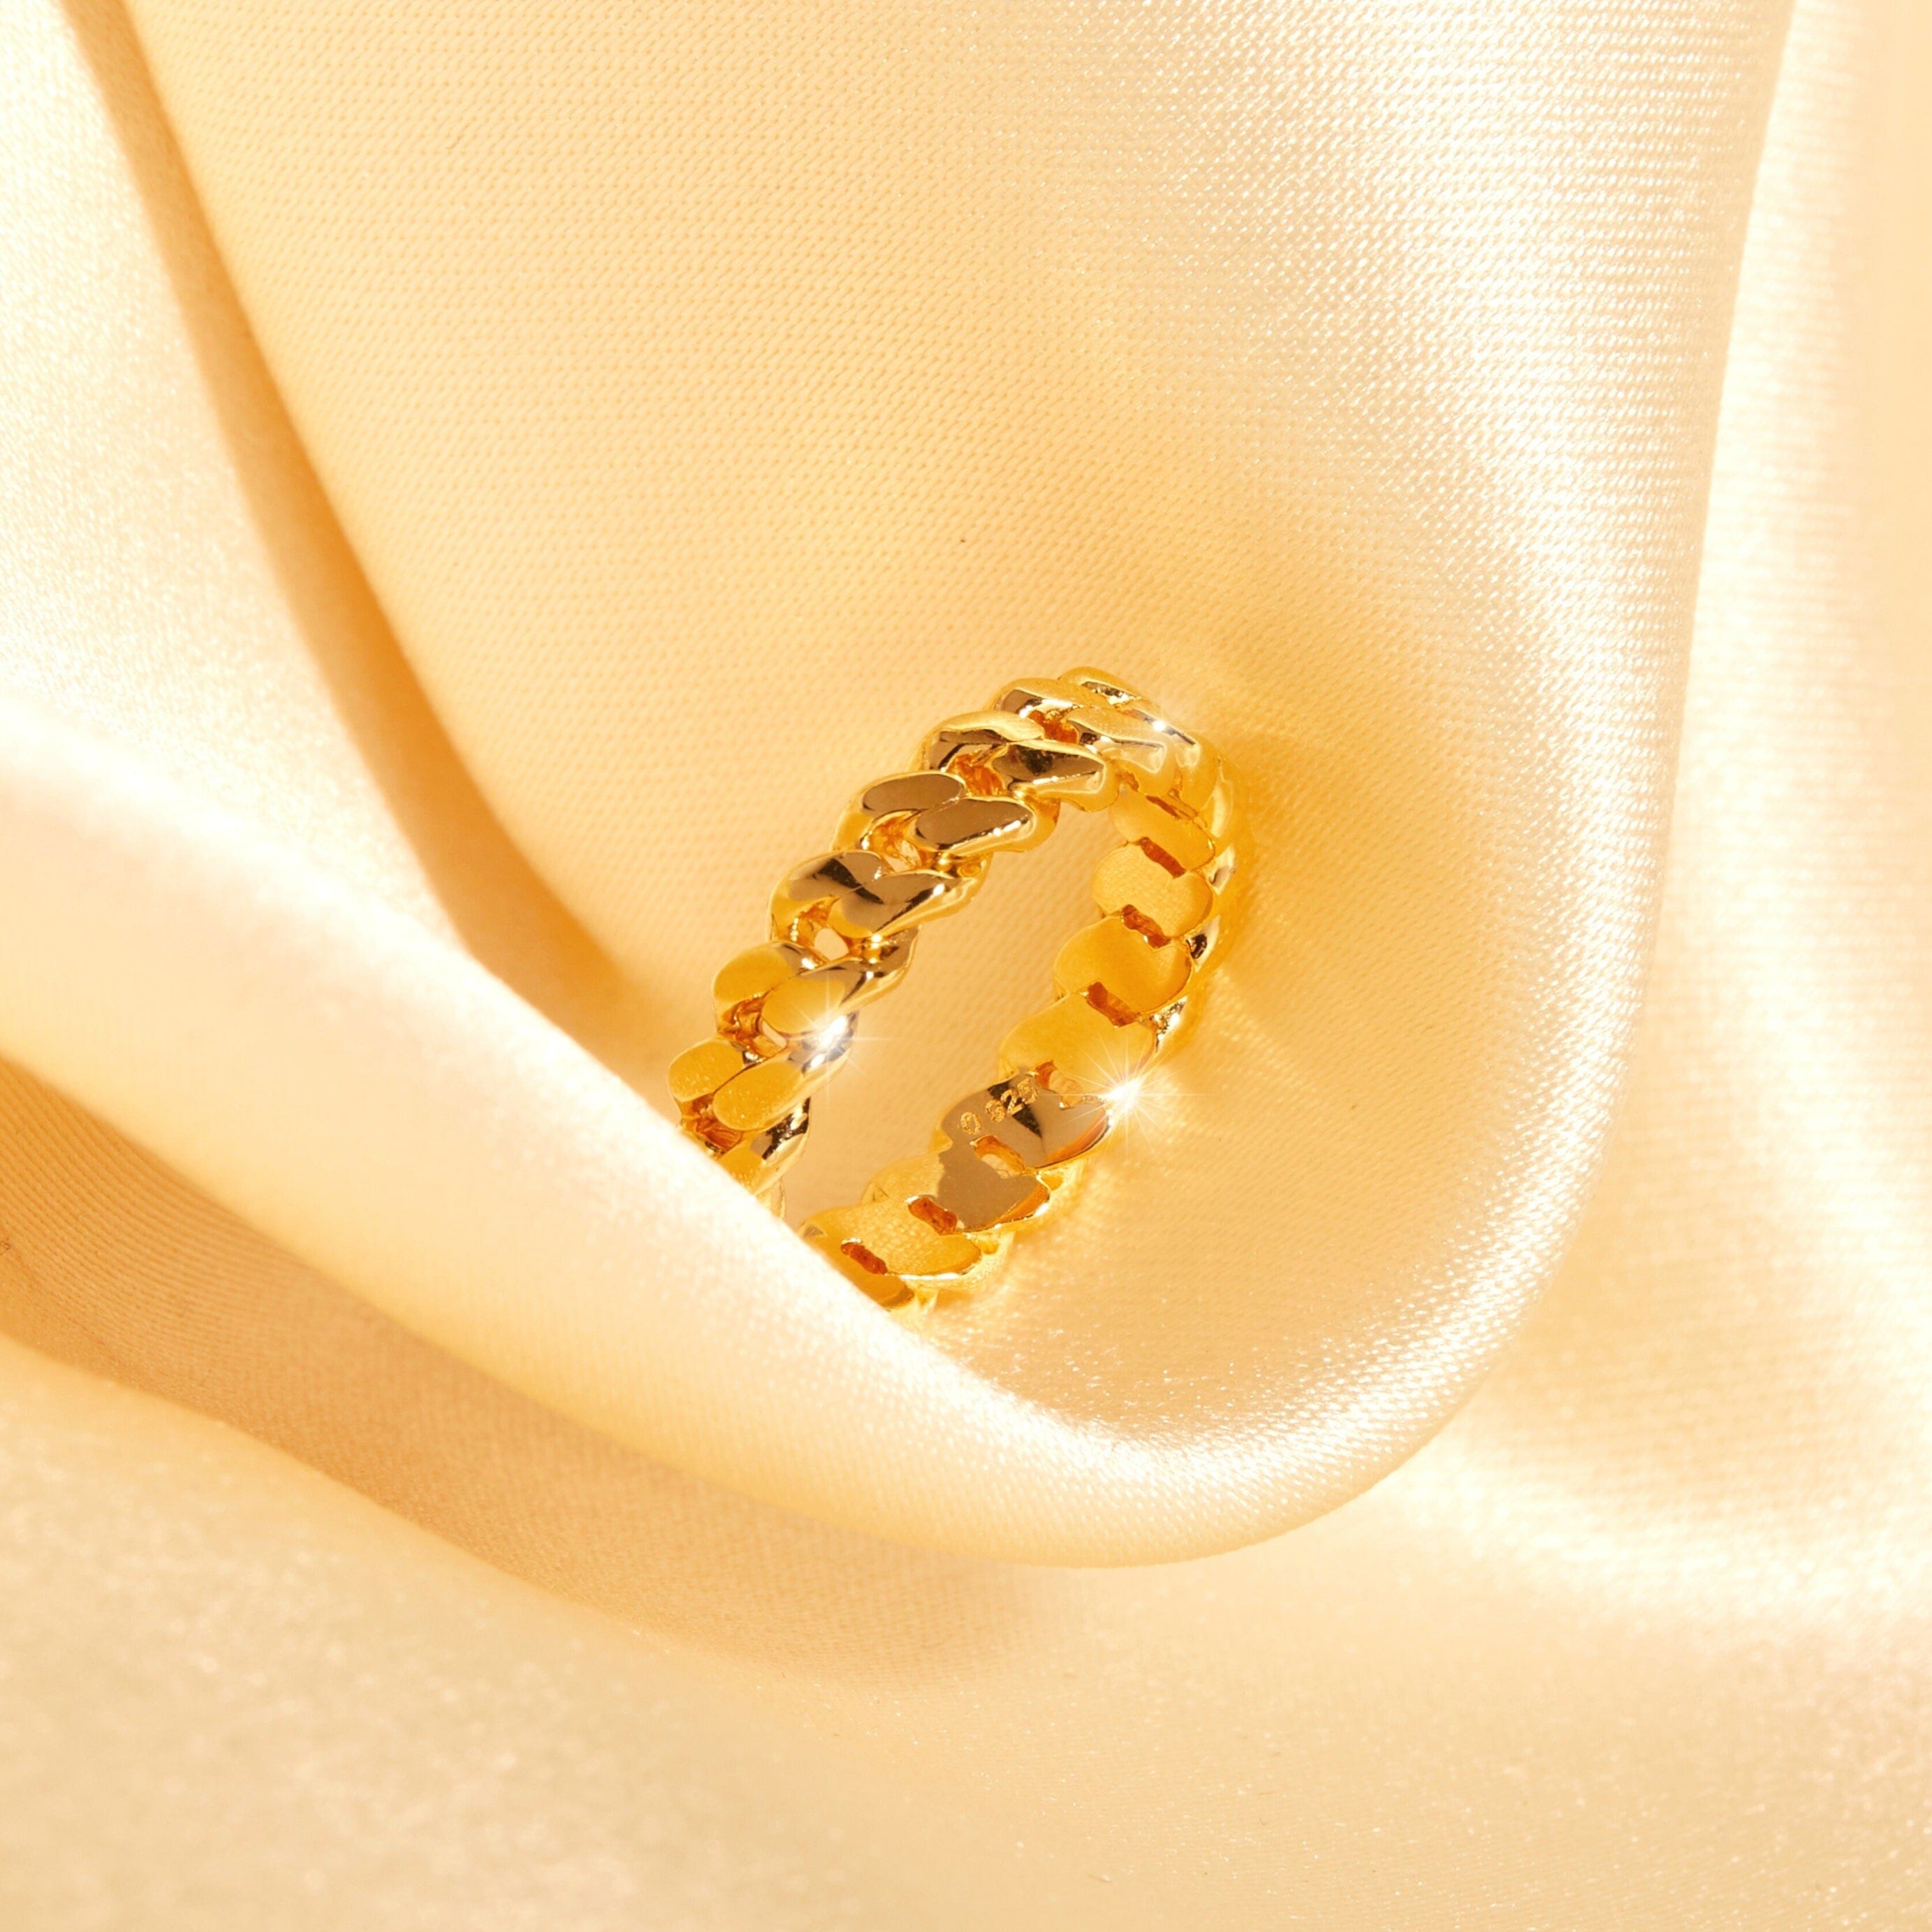 Love Me Knot Ring in Yellow, Rose or White Gold